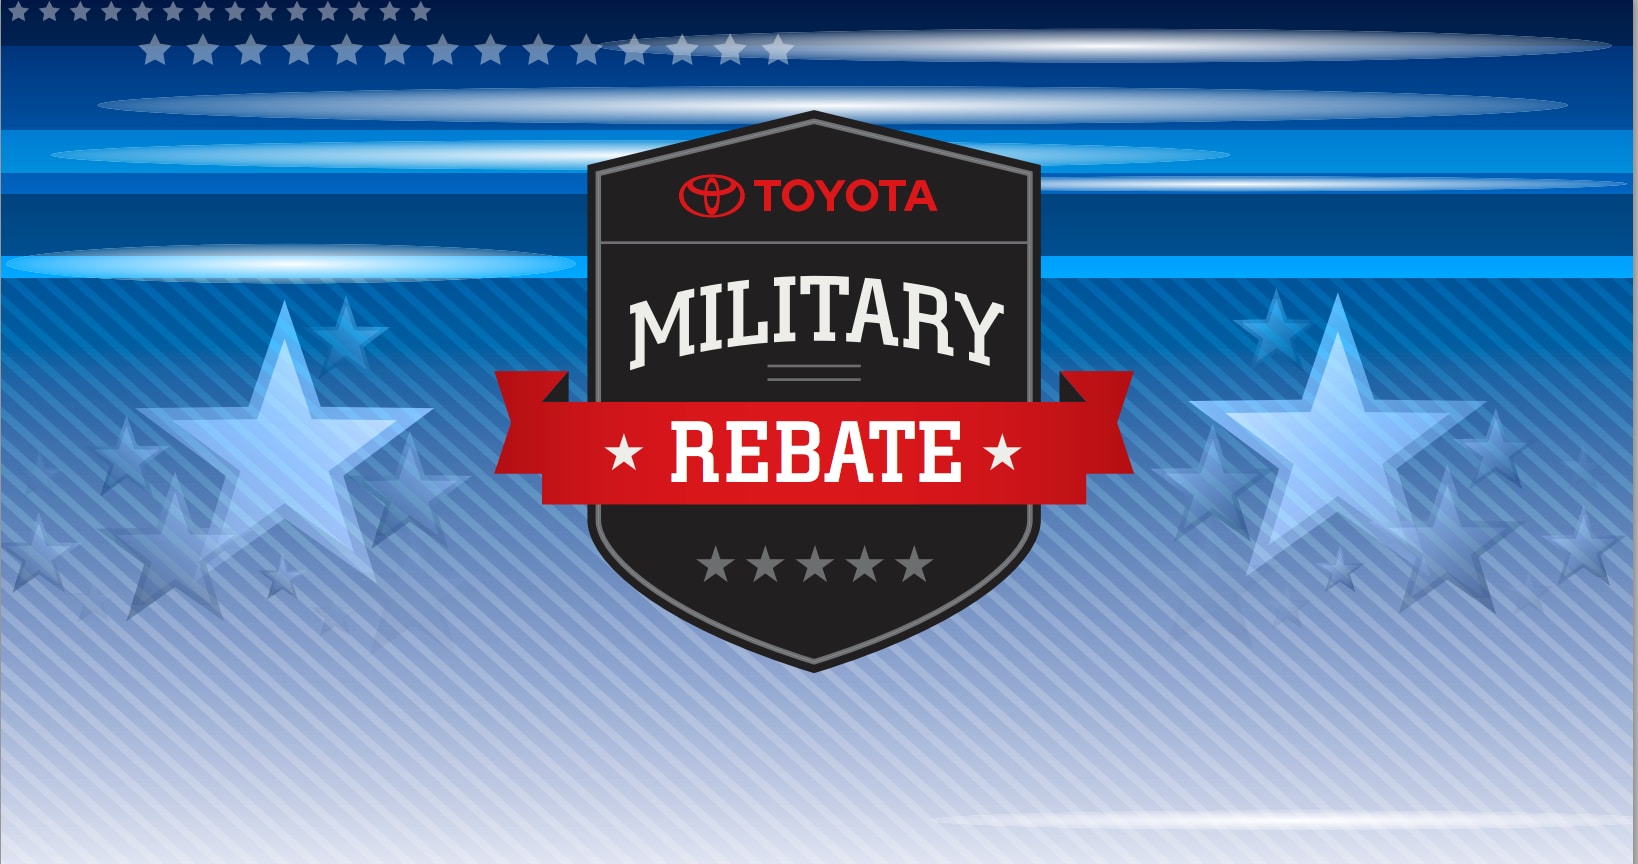 Toyota financial services military discount